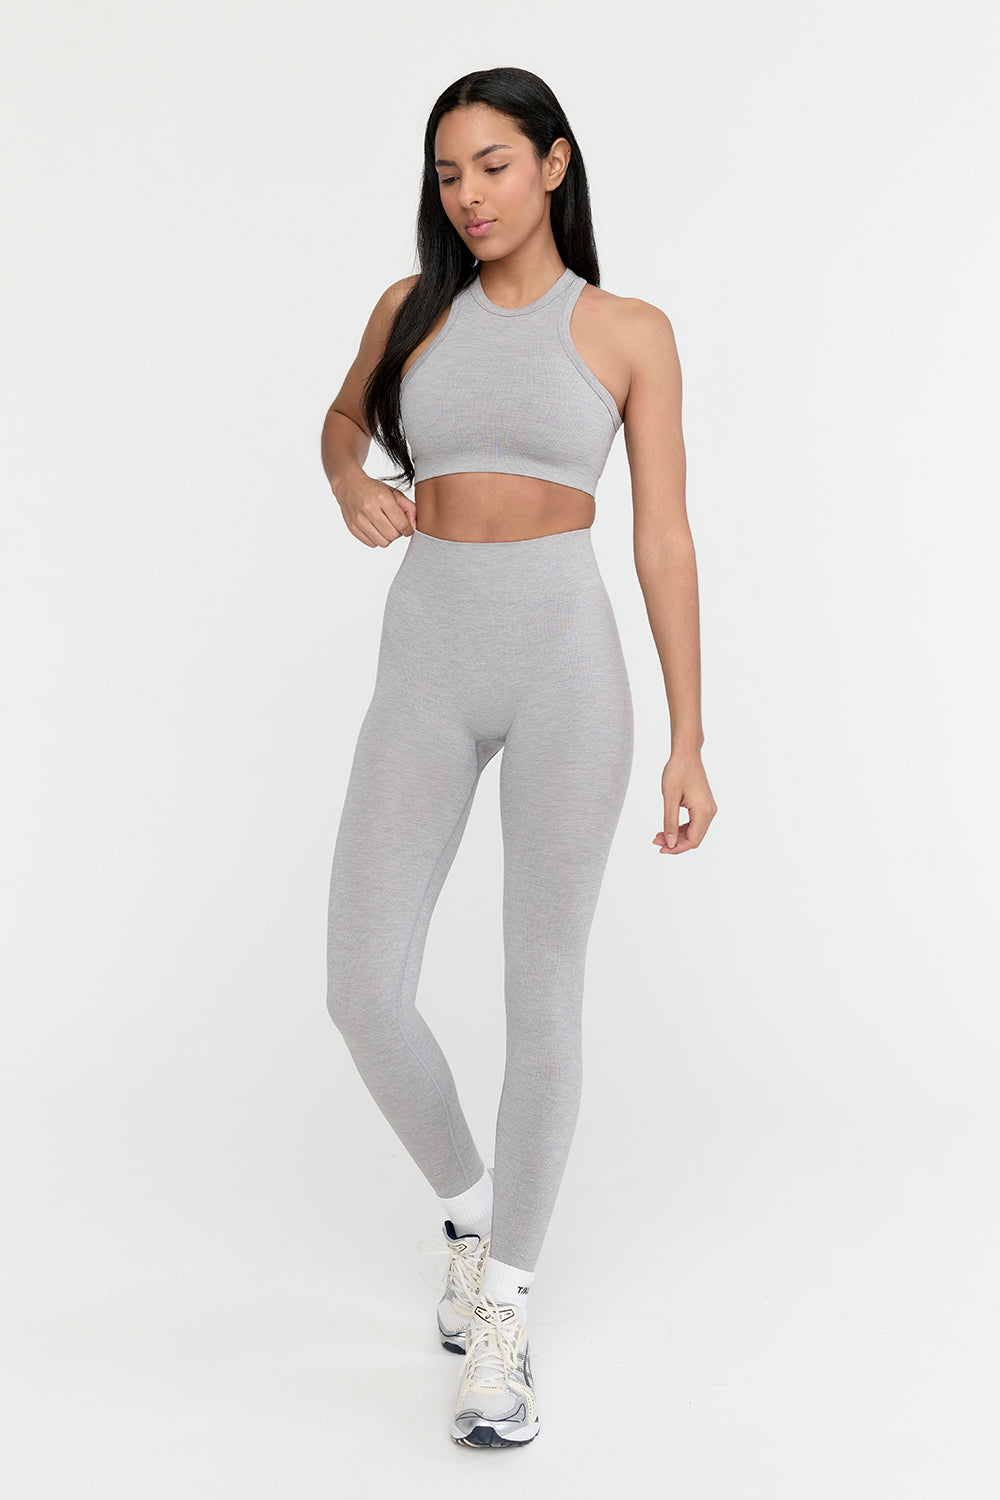 The Best High-Waisted Workout Leggings